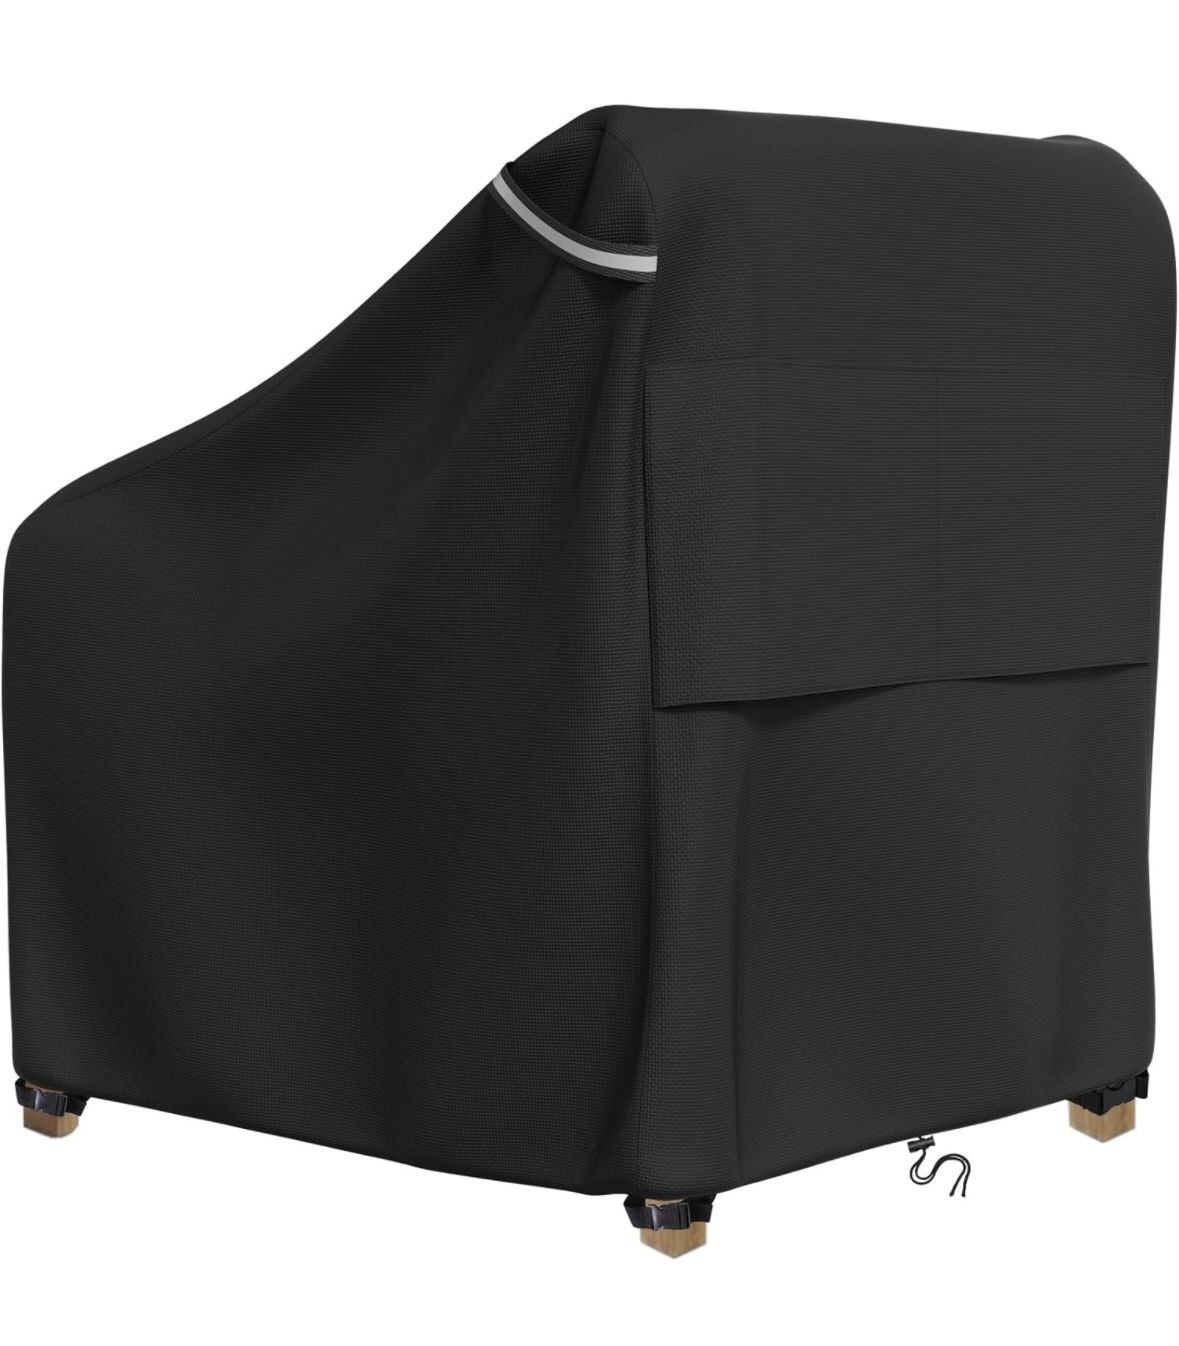 Patio Chair Covers Outdoor Furniture Covers  Black One Pack